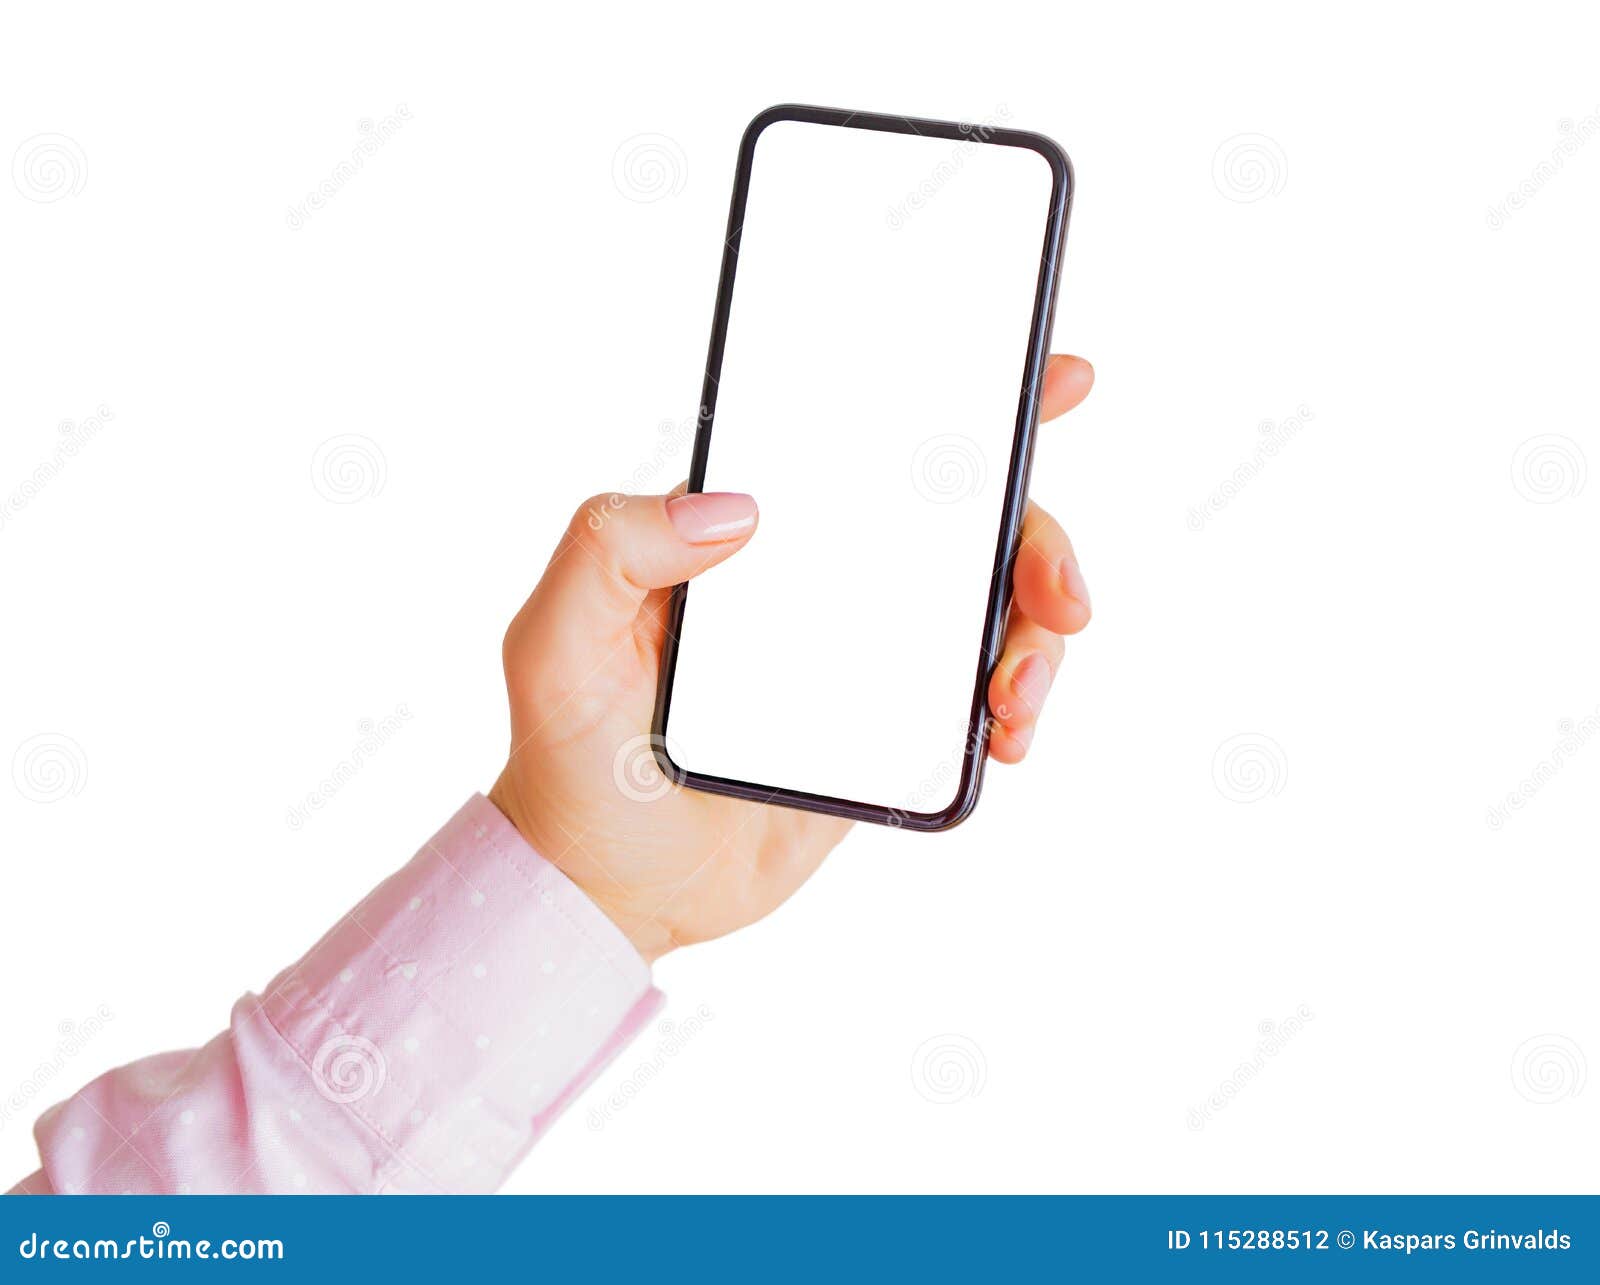 person holding phone with empty white touchscreen. mobile app mockup.